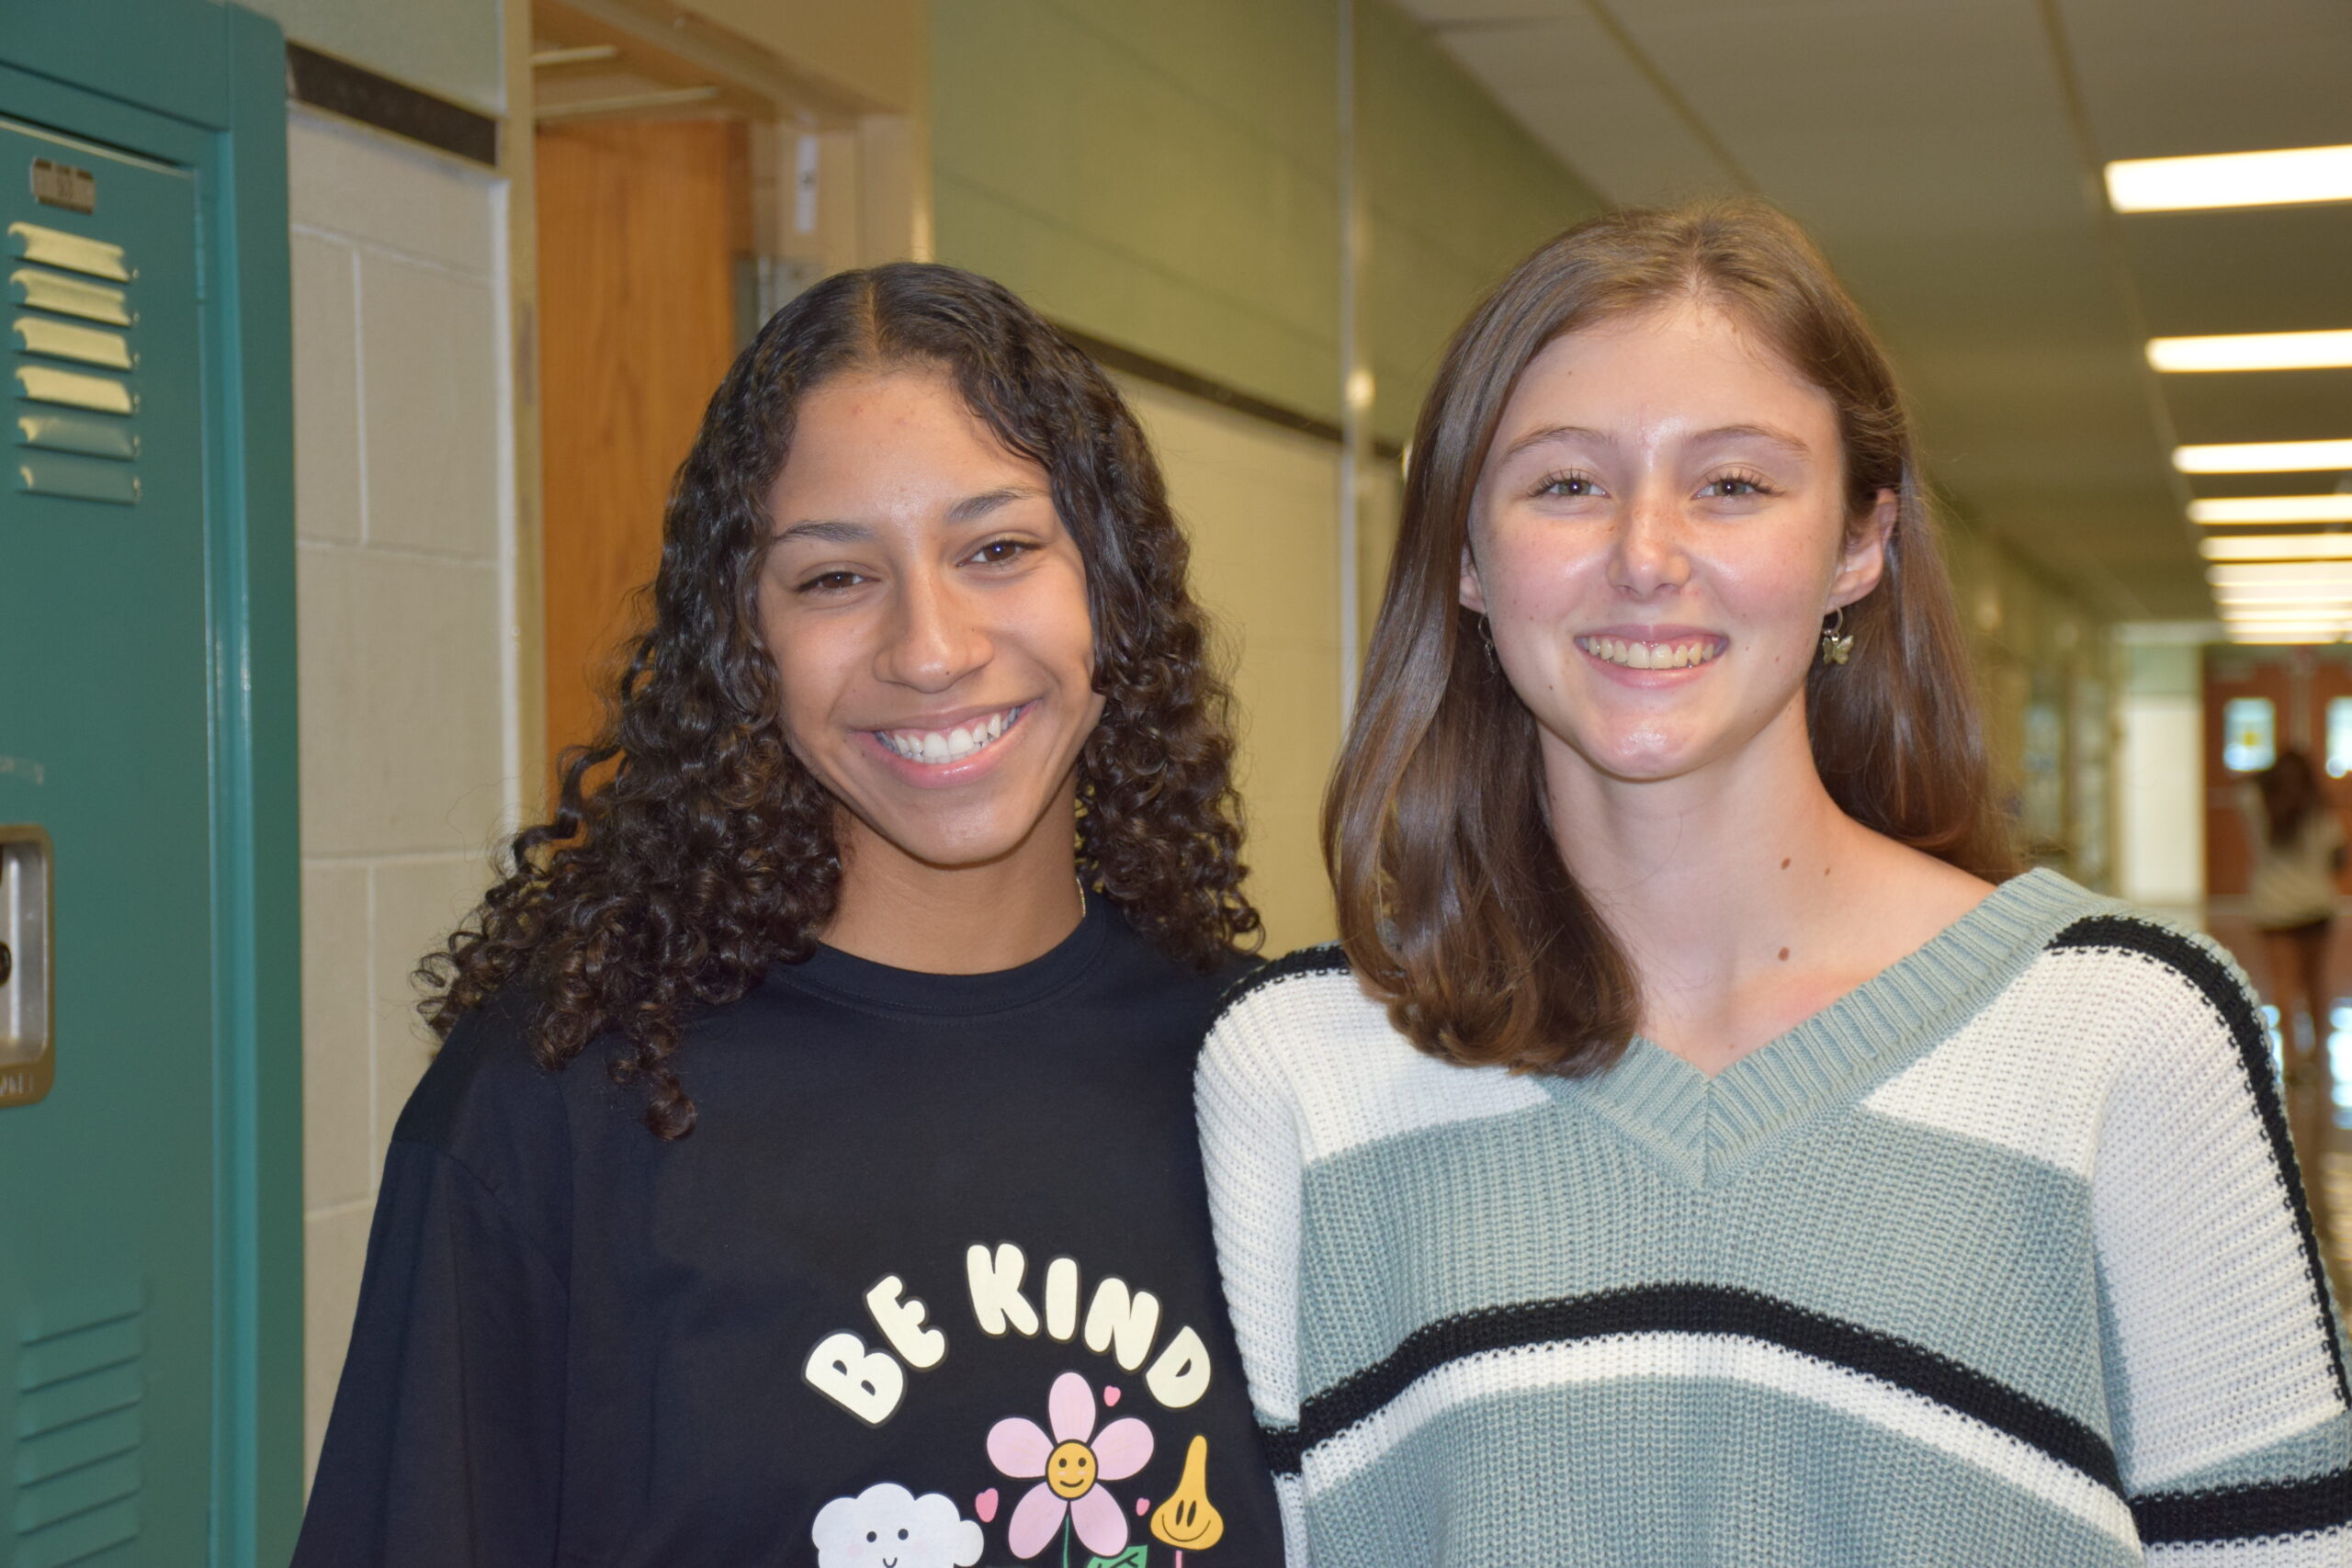 Westhampton Beach High School students Kylah Avery, left, and Meghan Kelly earned national recognition through the College Board National Recognition Program. COURTESY WESTHAMPTON BEACH SCHOOL DISTRICT